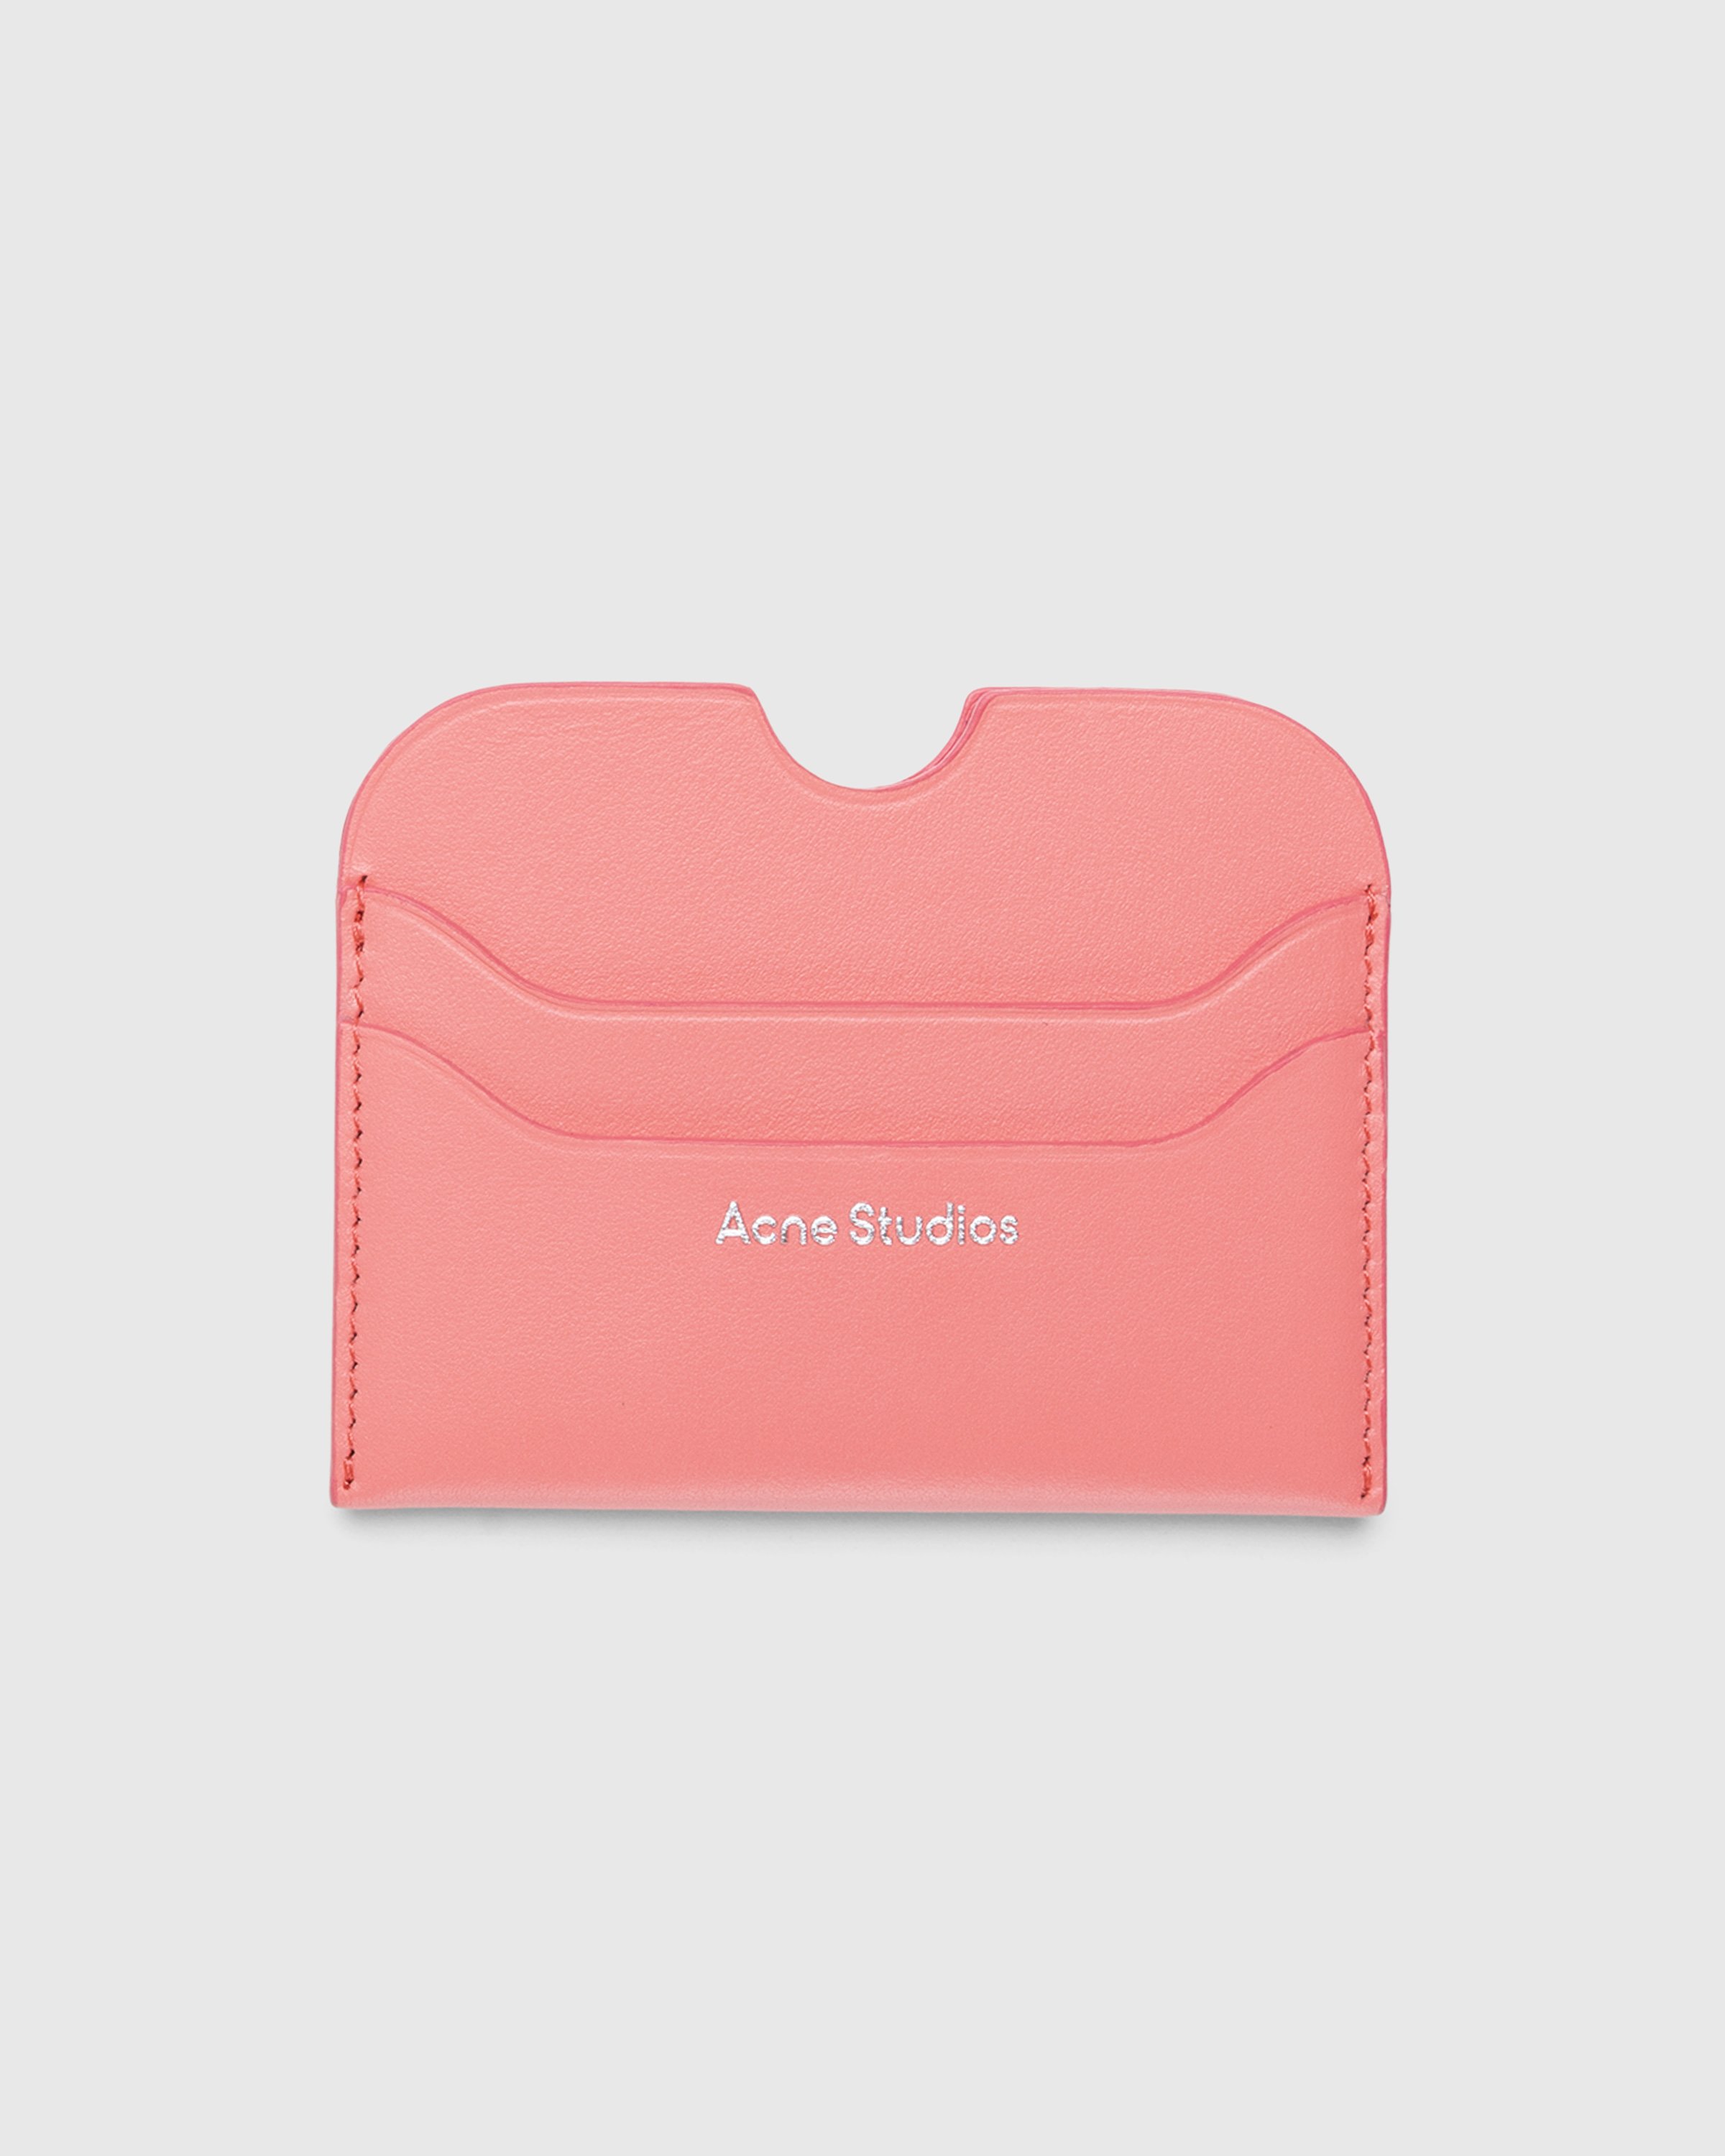 Acne Studios - Leather Card Holder Electric Pink - Accessories - Pink - Image 1